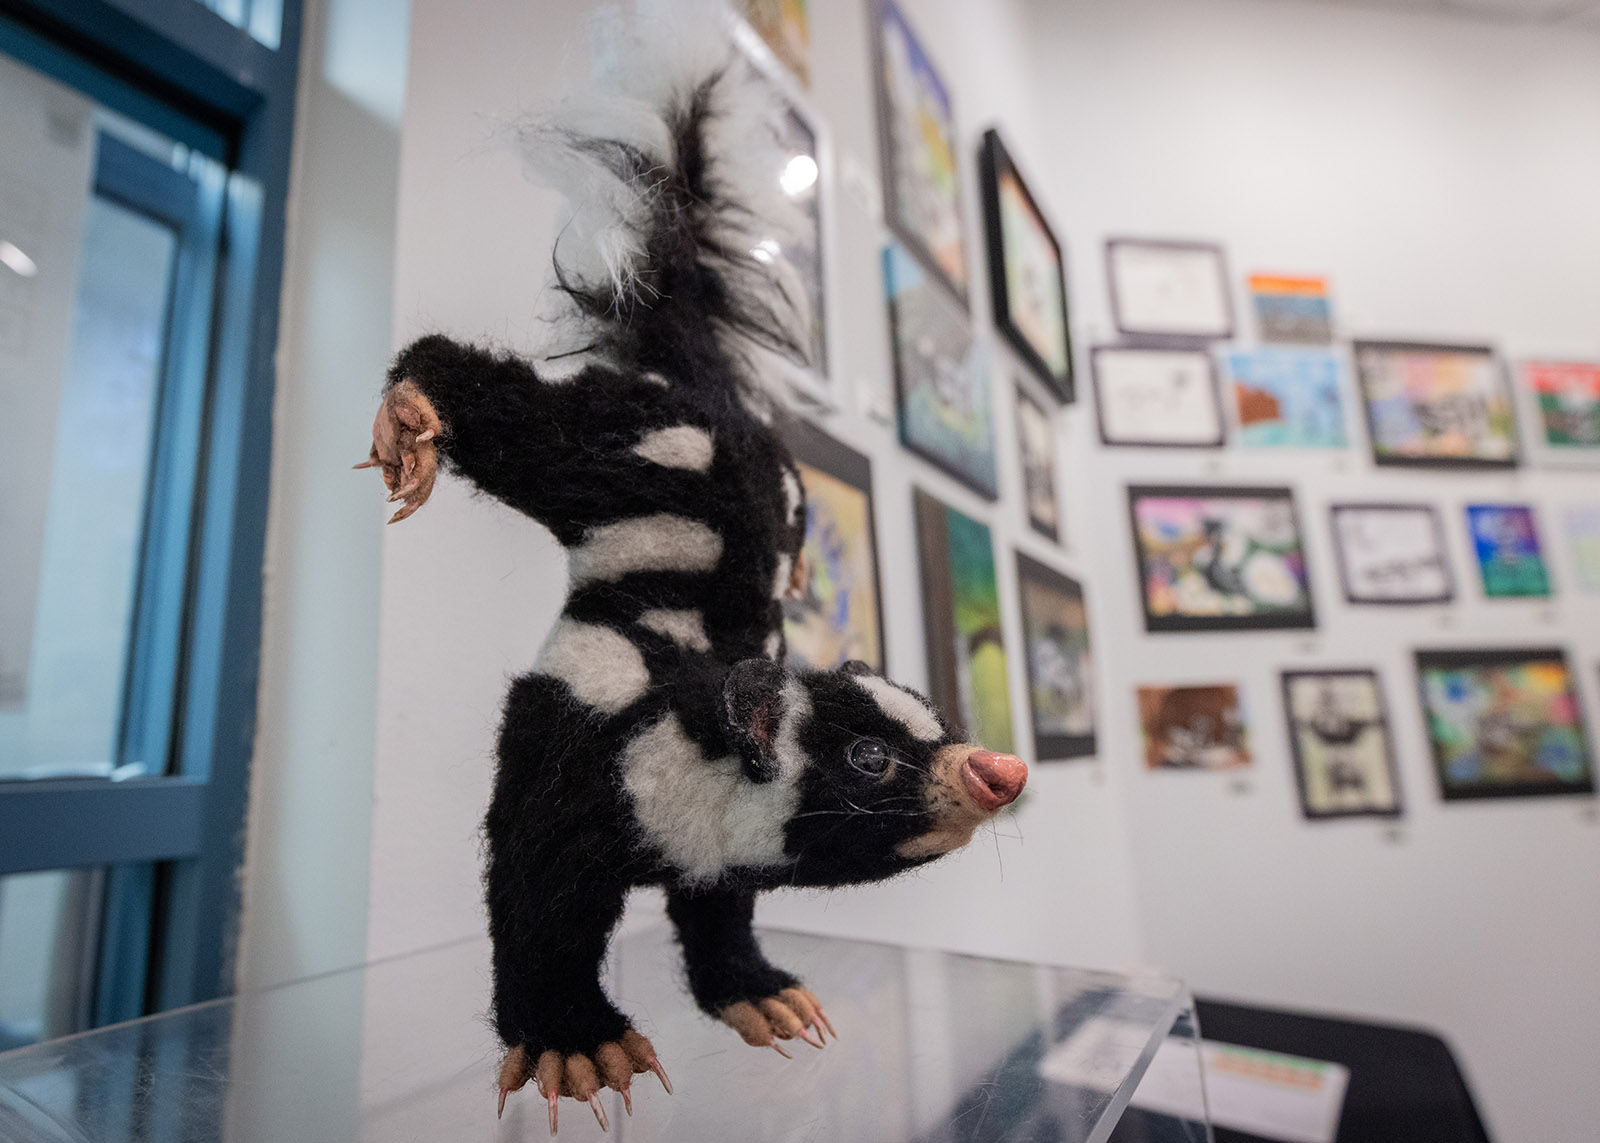 A photo of a spotted skunk in a handstand created in felt with artwork of spotted skunks hanging on walls in the background.